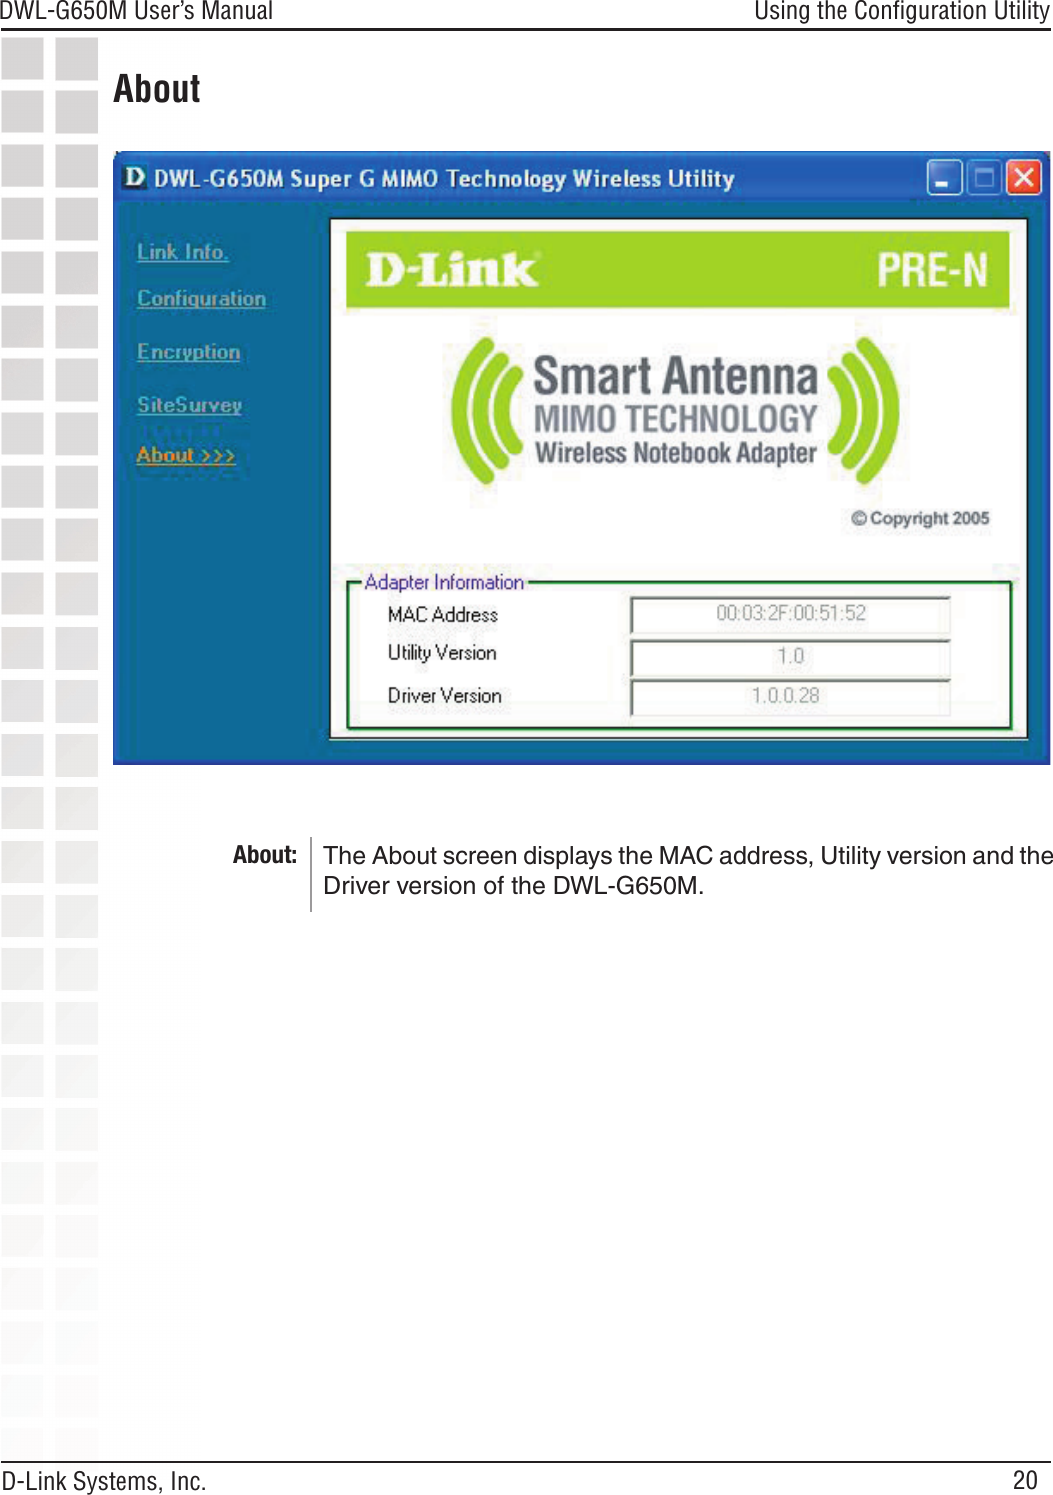 20DWL-G650M User’s Manual D-Link Systems, Inc.Using the Conﬁguration UtilityAboutAbout: The About screen displays the MAC address, Utility version and the Driver version of the DWL-G650M.